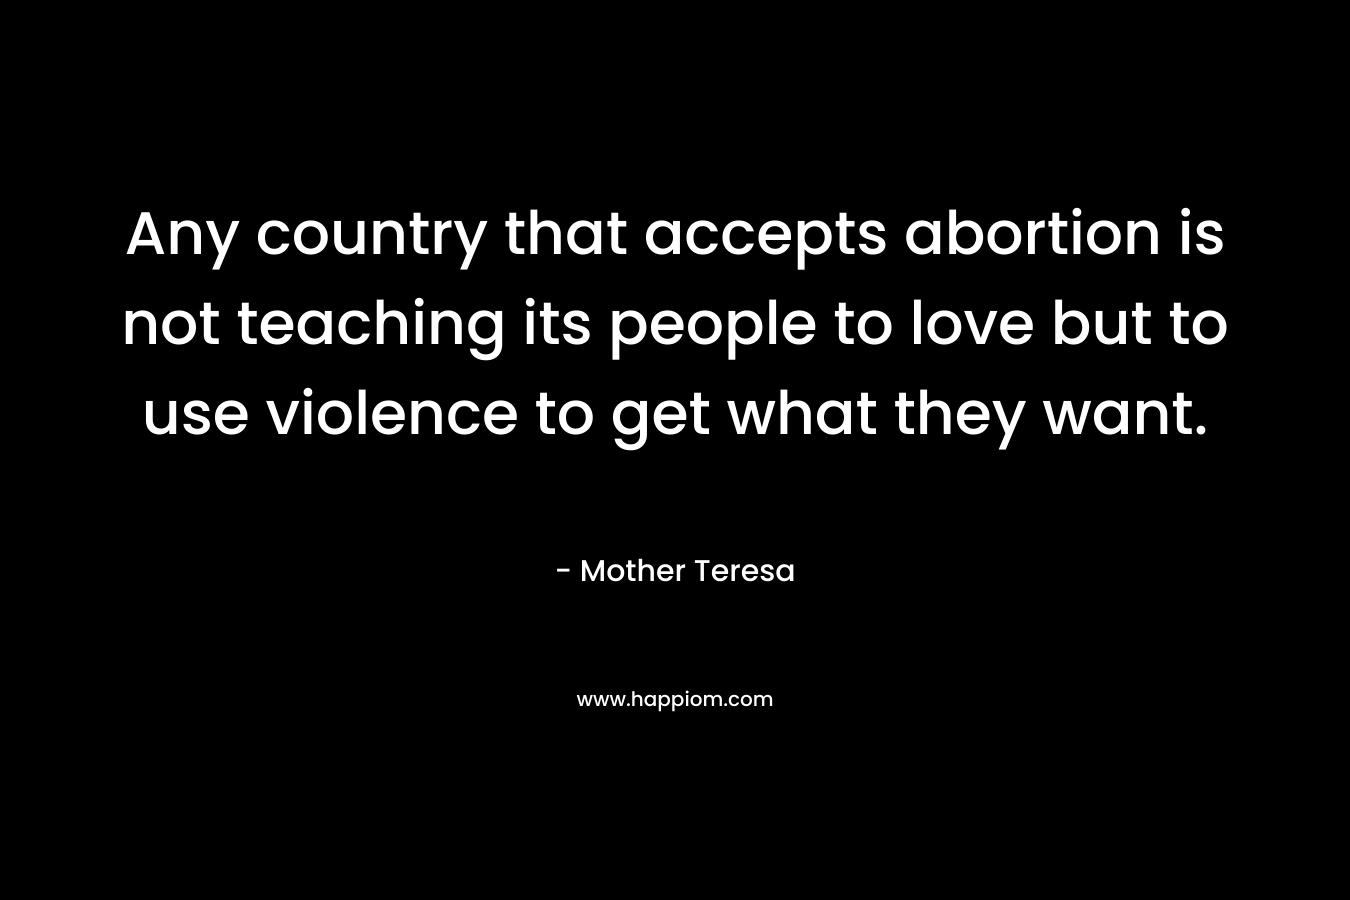 Any country that accepts abortion is not teaching its people to love but to use violence to get what they want.